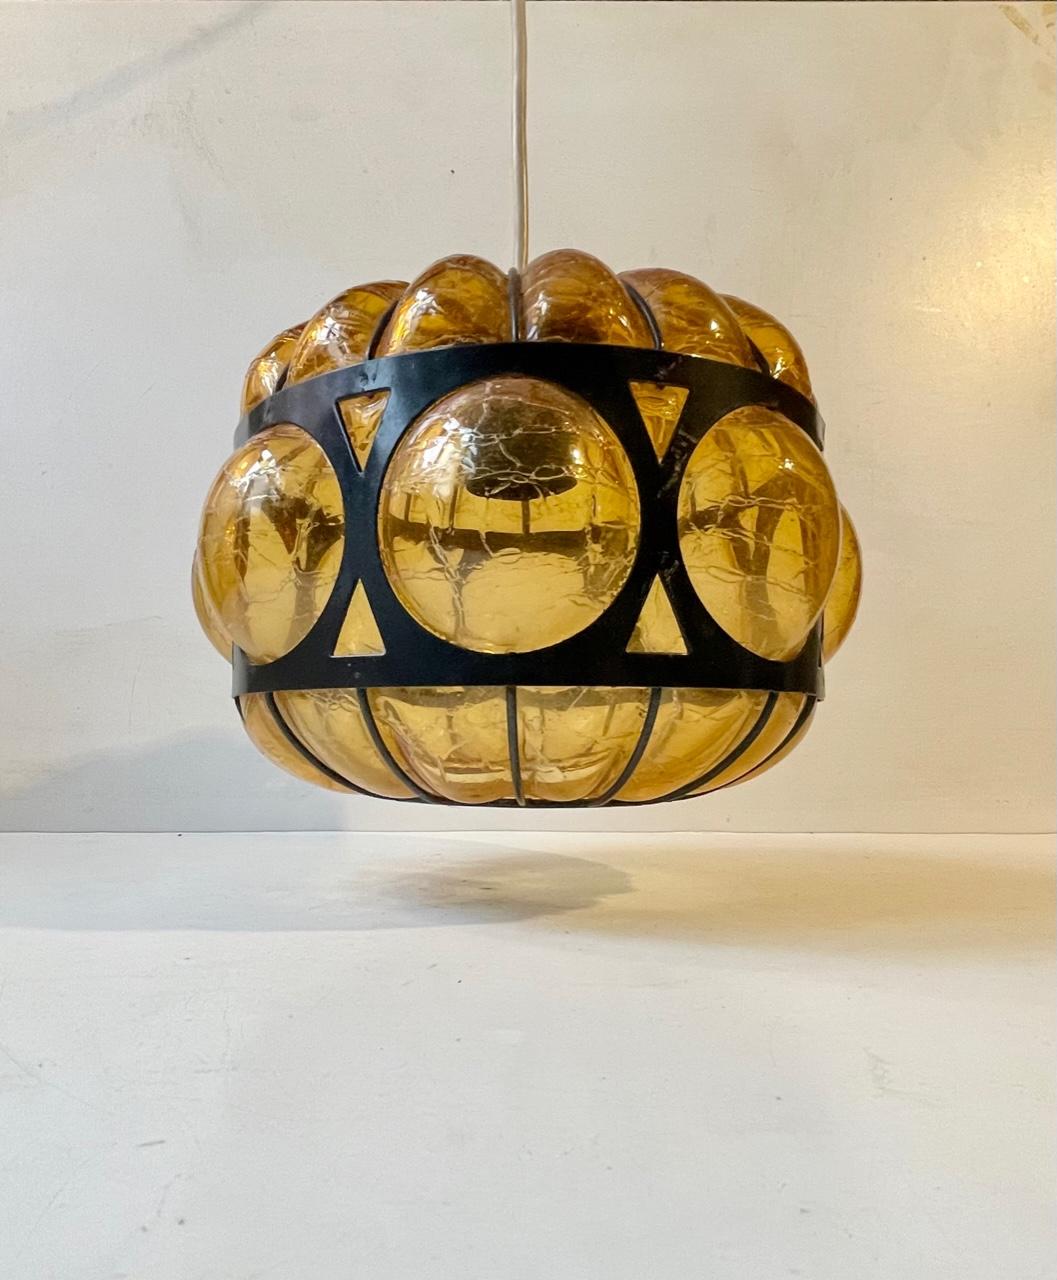 A caged hand blown amber glass pendant light. The glass displays texture and the steel 'cage' is powder coated black. Manufactured by RAAK in Holland and designed by Nanny Still circa 1960-70. Measurements: 23x20 cm.